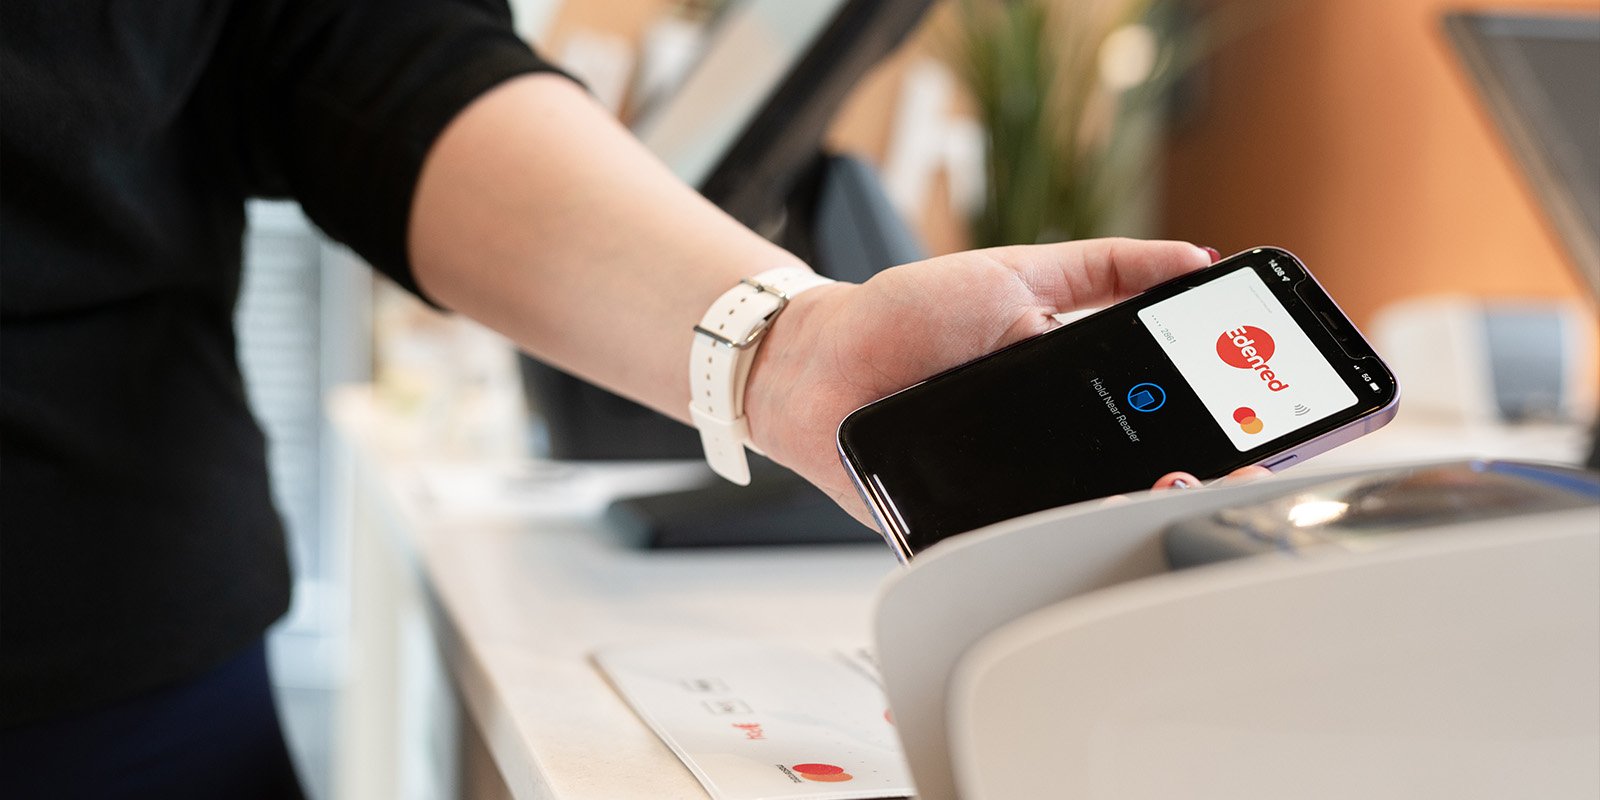  The phone that is in a person's hand next to the payment terminal. The screen shows Edenred's payment card in Apple Pay.